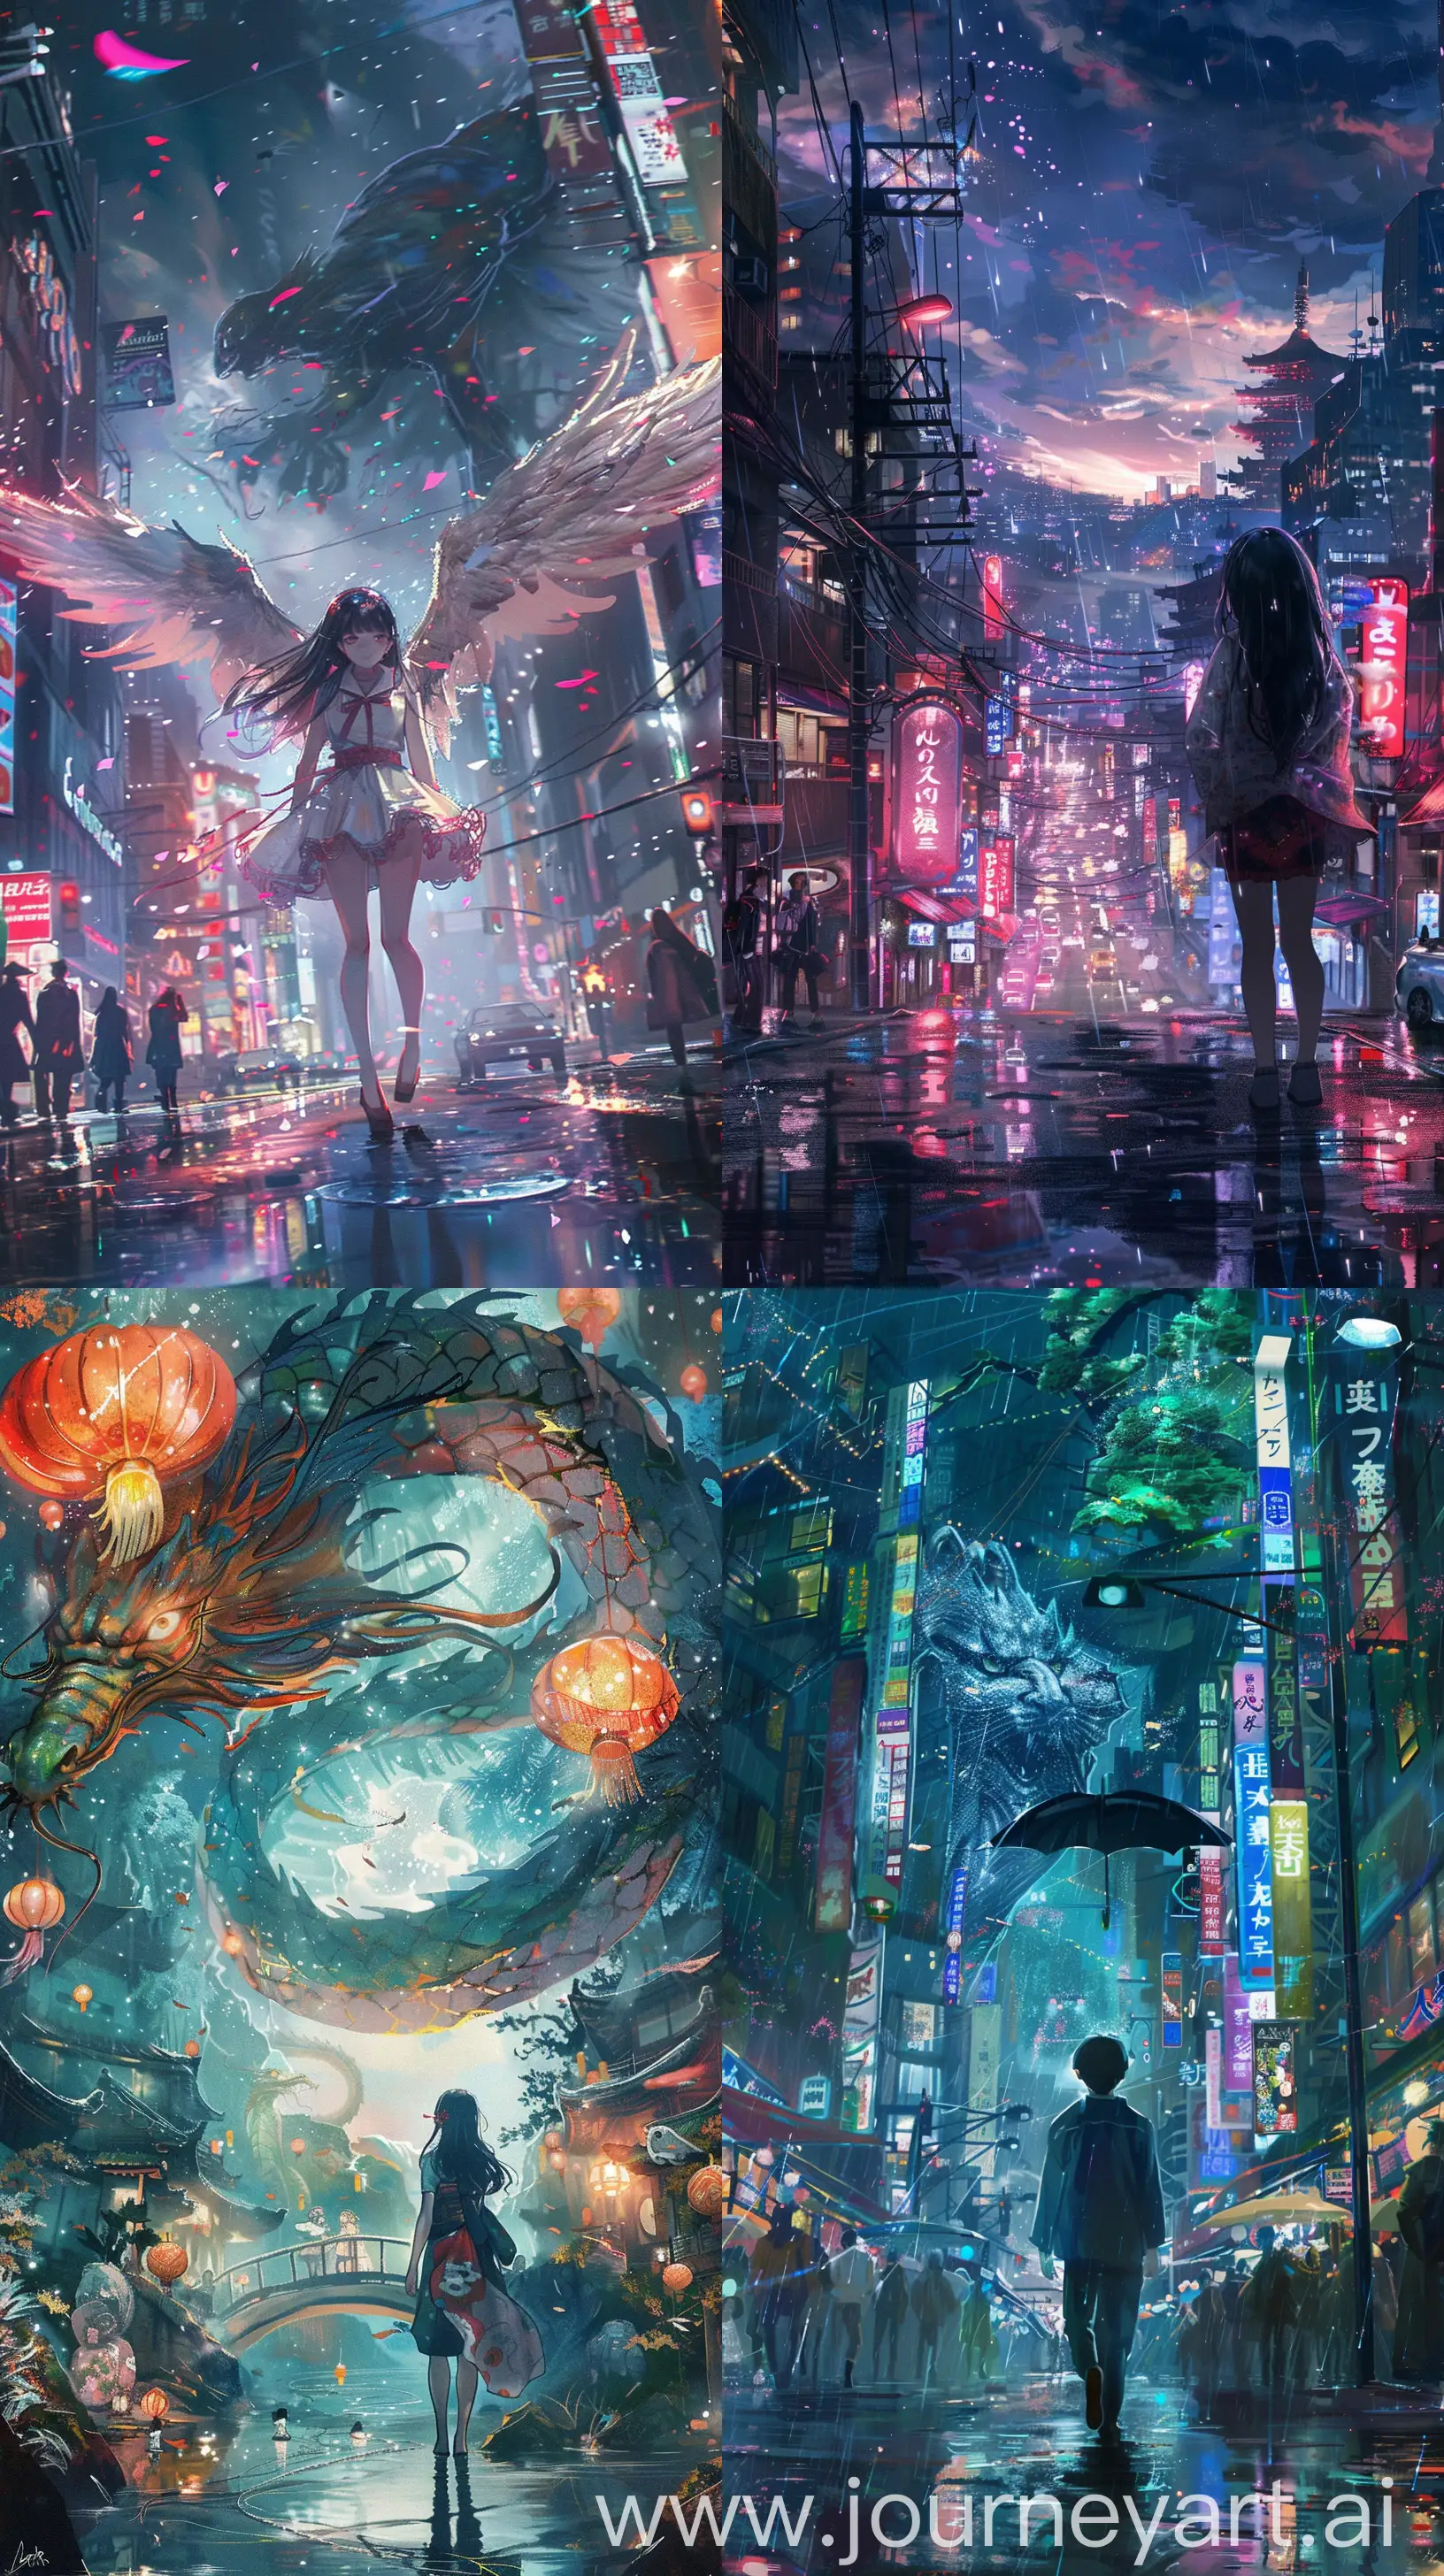 Dragon-Soaring-in-Cyberpunk-Fantasy-World-Kyoto-Animation-Inspired-Anime-with-Traditional-Chinese-Art-Elements